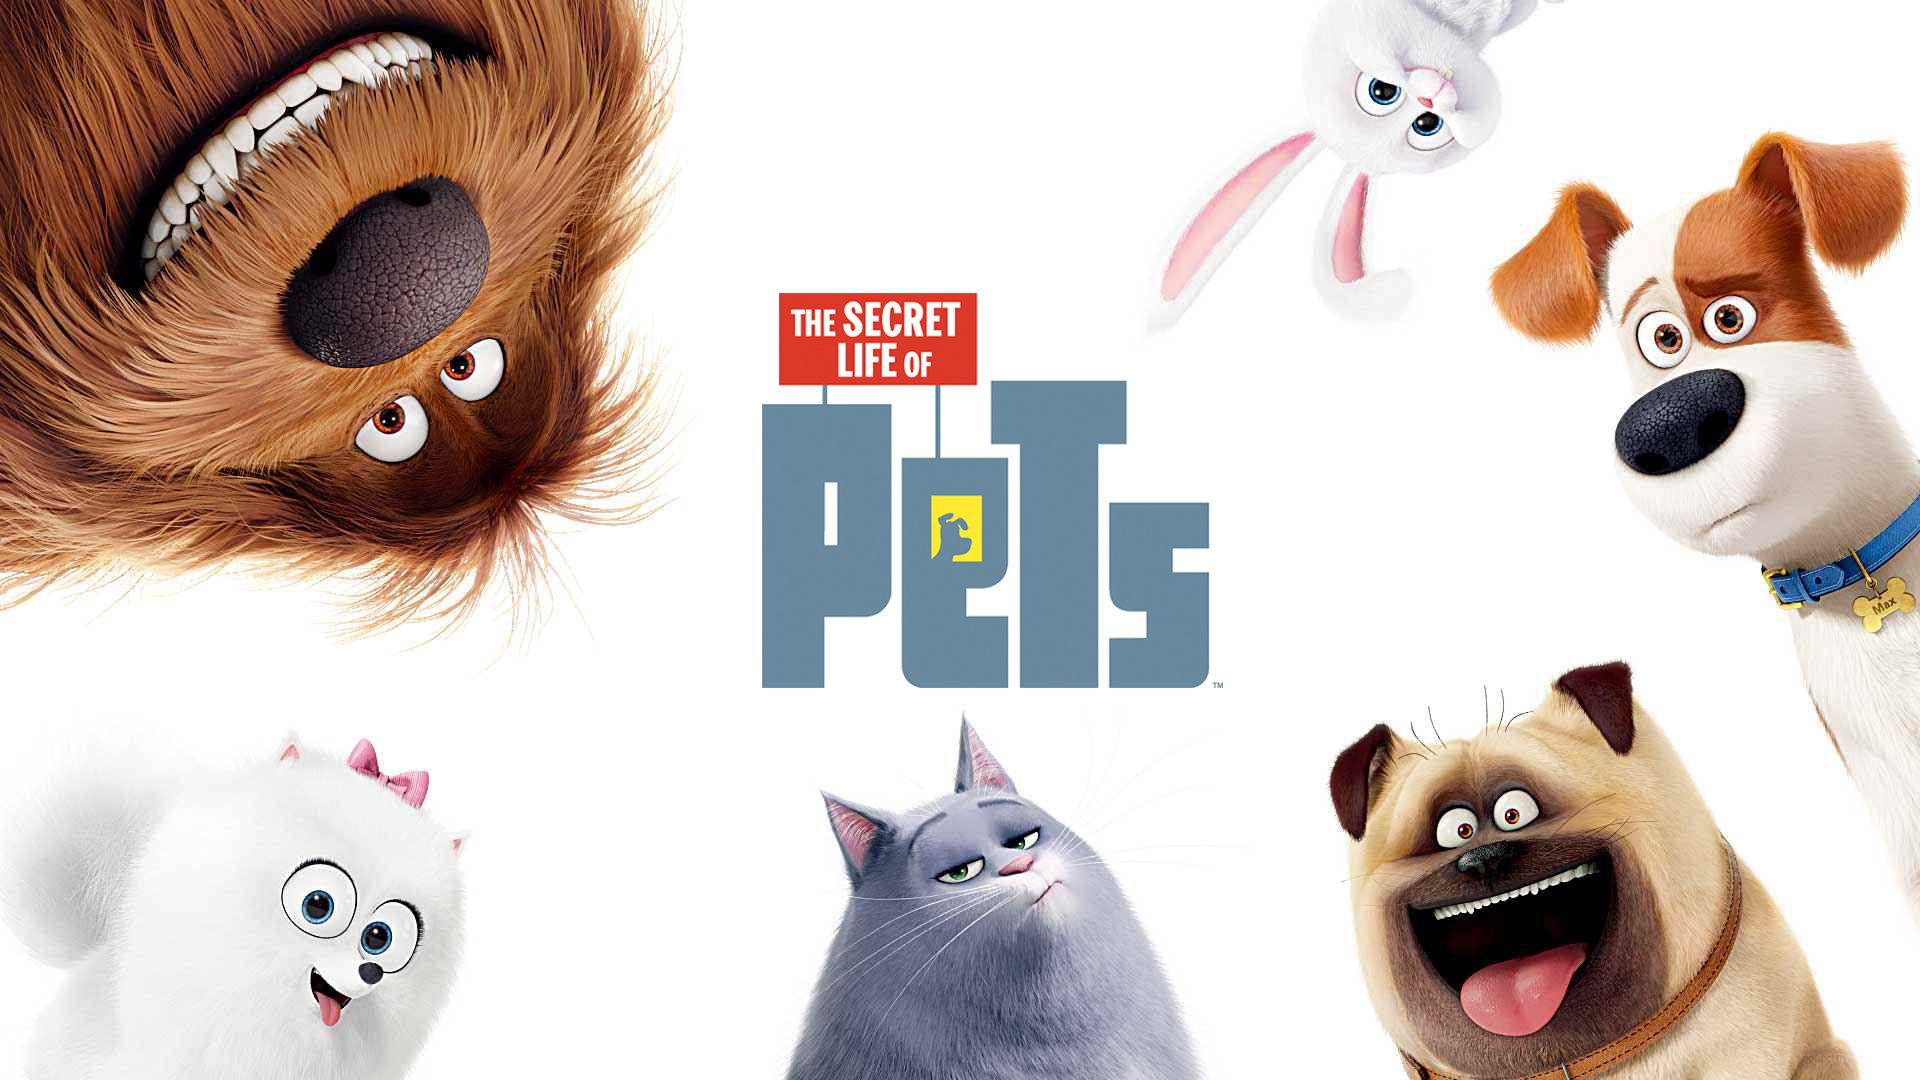 THE SECRET LIFE OF PETS Free Outdoor Screening Monthly Magazine